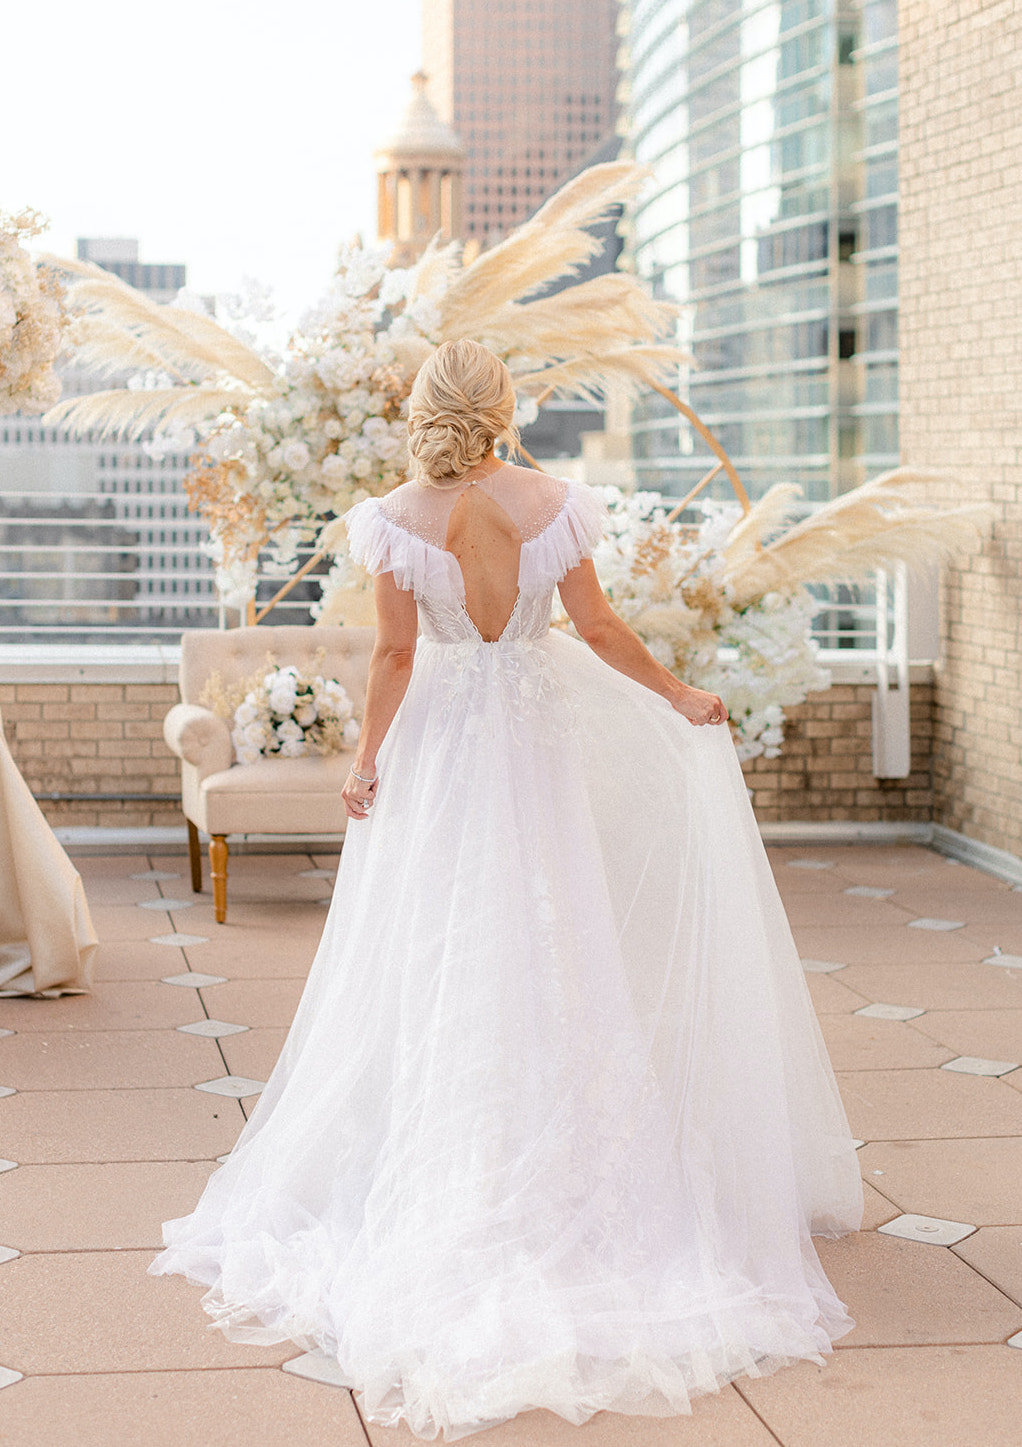 The bride sways with her back to the camera, revealing her backless gown and the embellishments in the fabric.